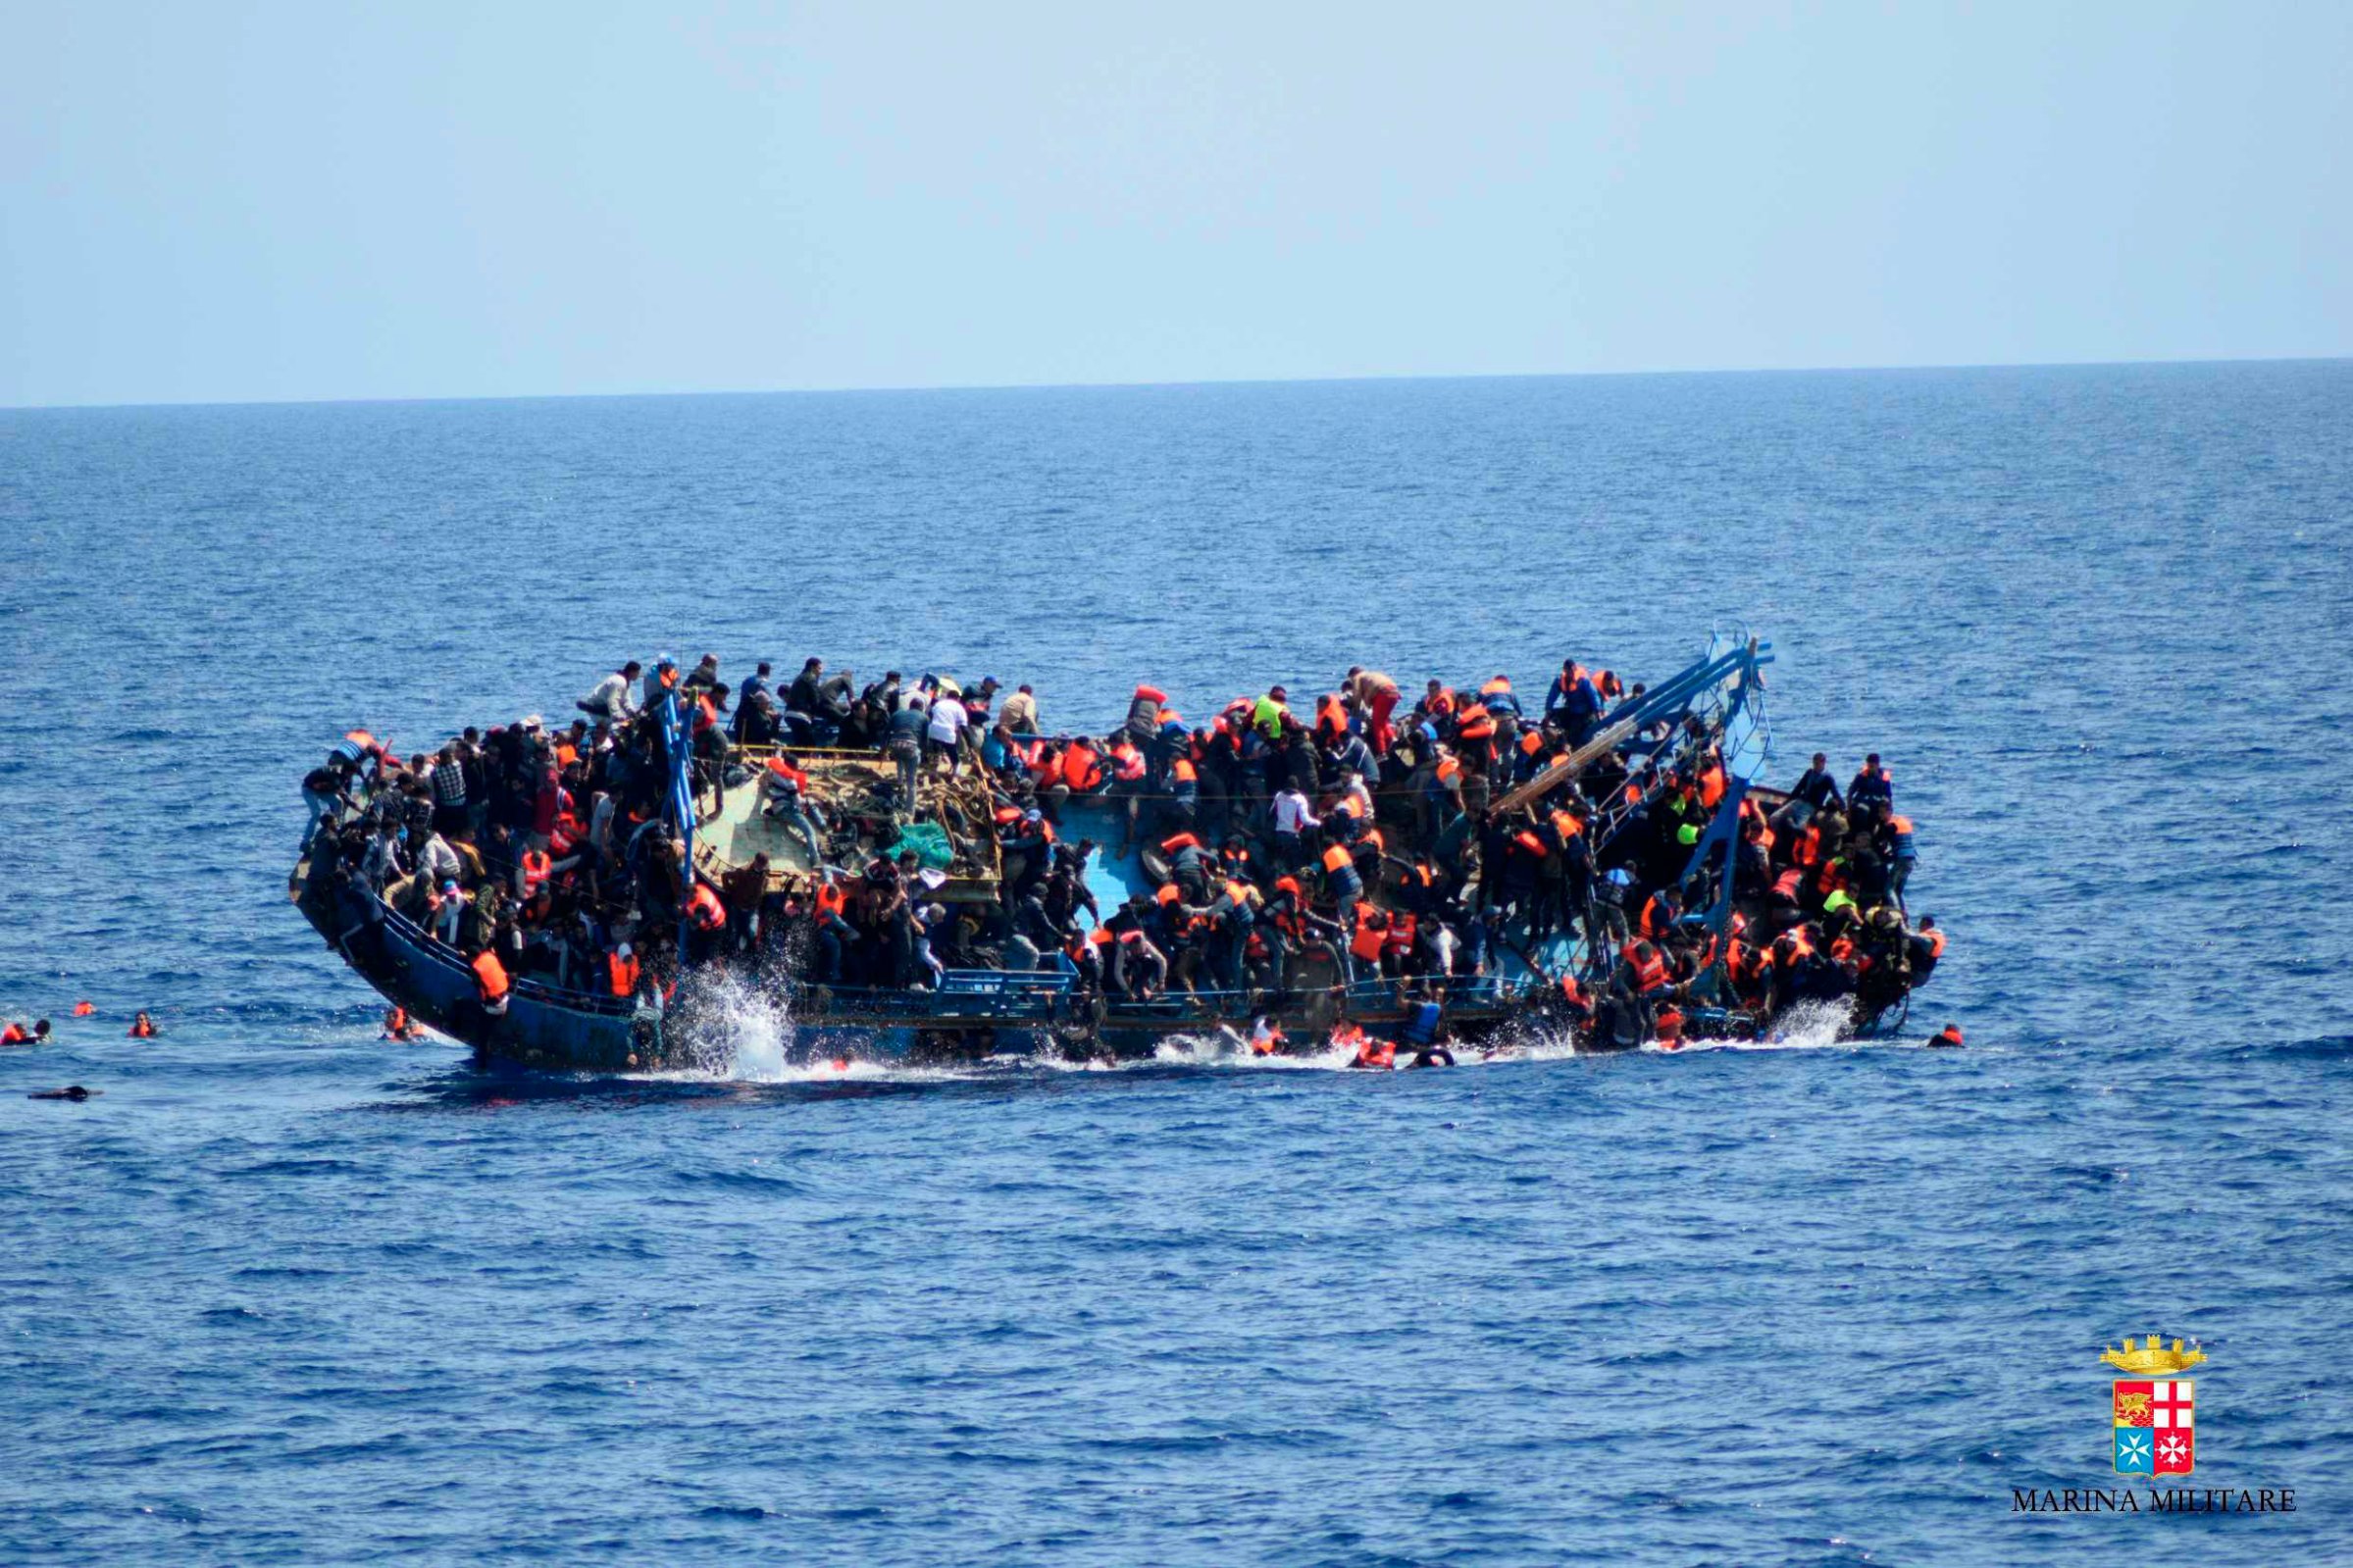 TOPSHOT - This handout picture released on May 25, 2016 by the Italian Navy (Marina Militare) shows the shipwreck of an overcrowded boat of migrants off the Libyan coast today. At least seven migrants have drowned after the heavily overcrowded boat they were sailing on overturned, the Italian navy said. The navy said 500 people had been pulled to safety and seven bodies recovered, but rescue operations were continuing and the death toll could rise. The navy's Bettica patrol boat spotted "a boat in precarious conditions off the coast of Libya with numerous migrants aboard," it said in a statement.